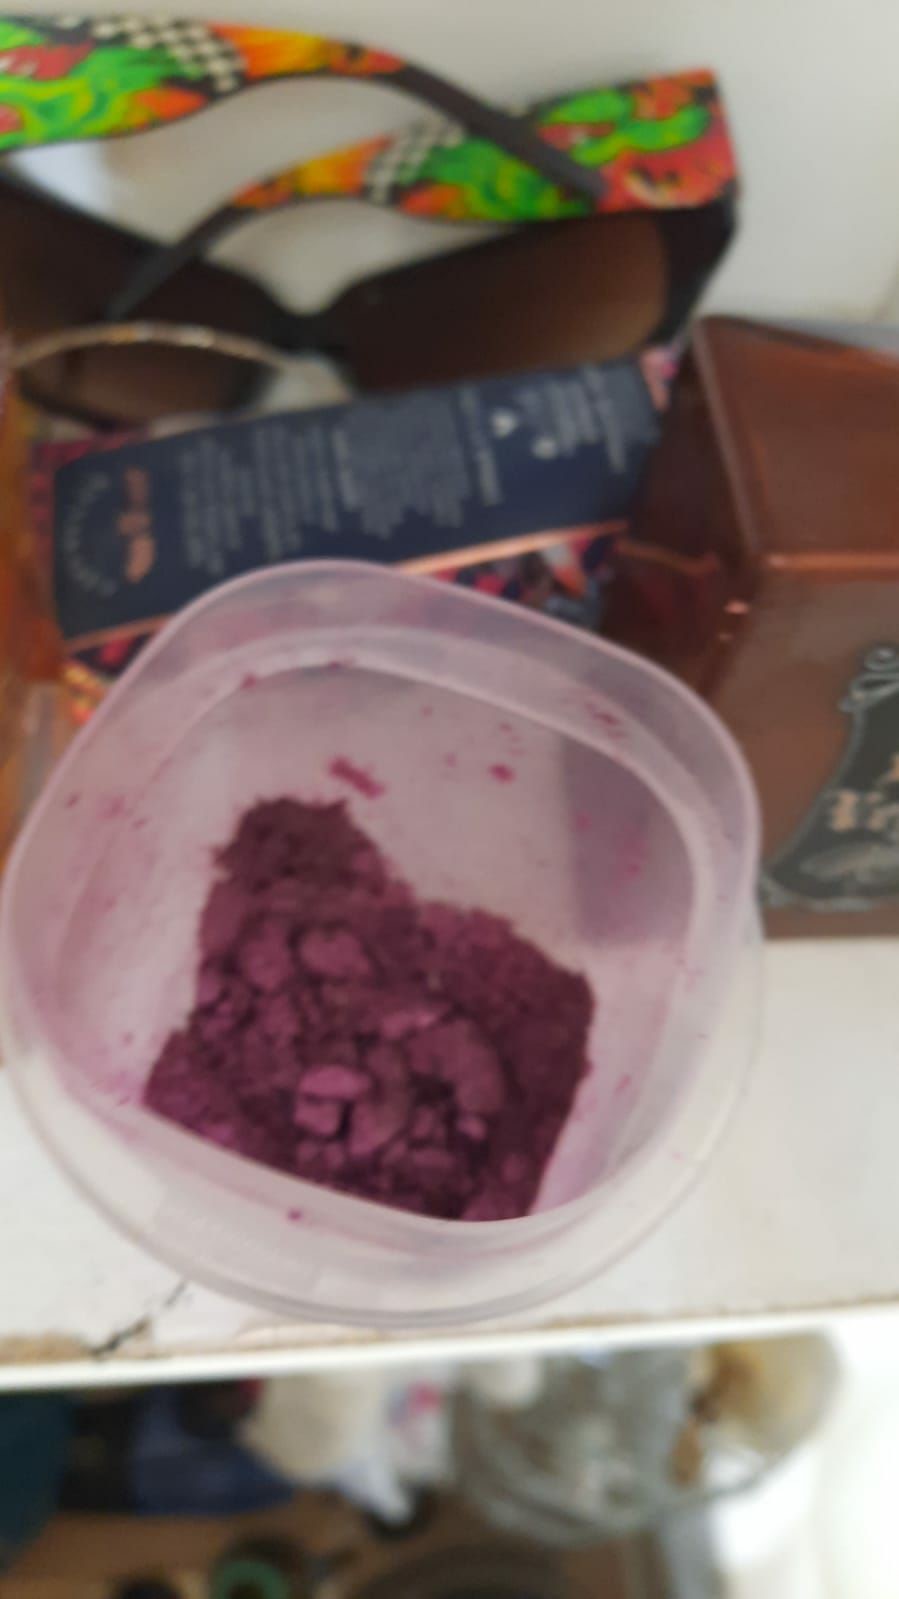 Purple fentanyl seized during search warrants executed at homes in Napanee and Belleville on Dec. 11.